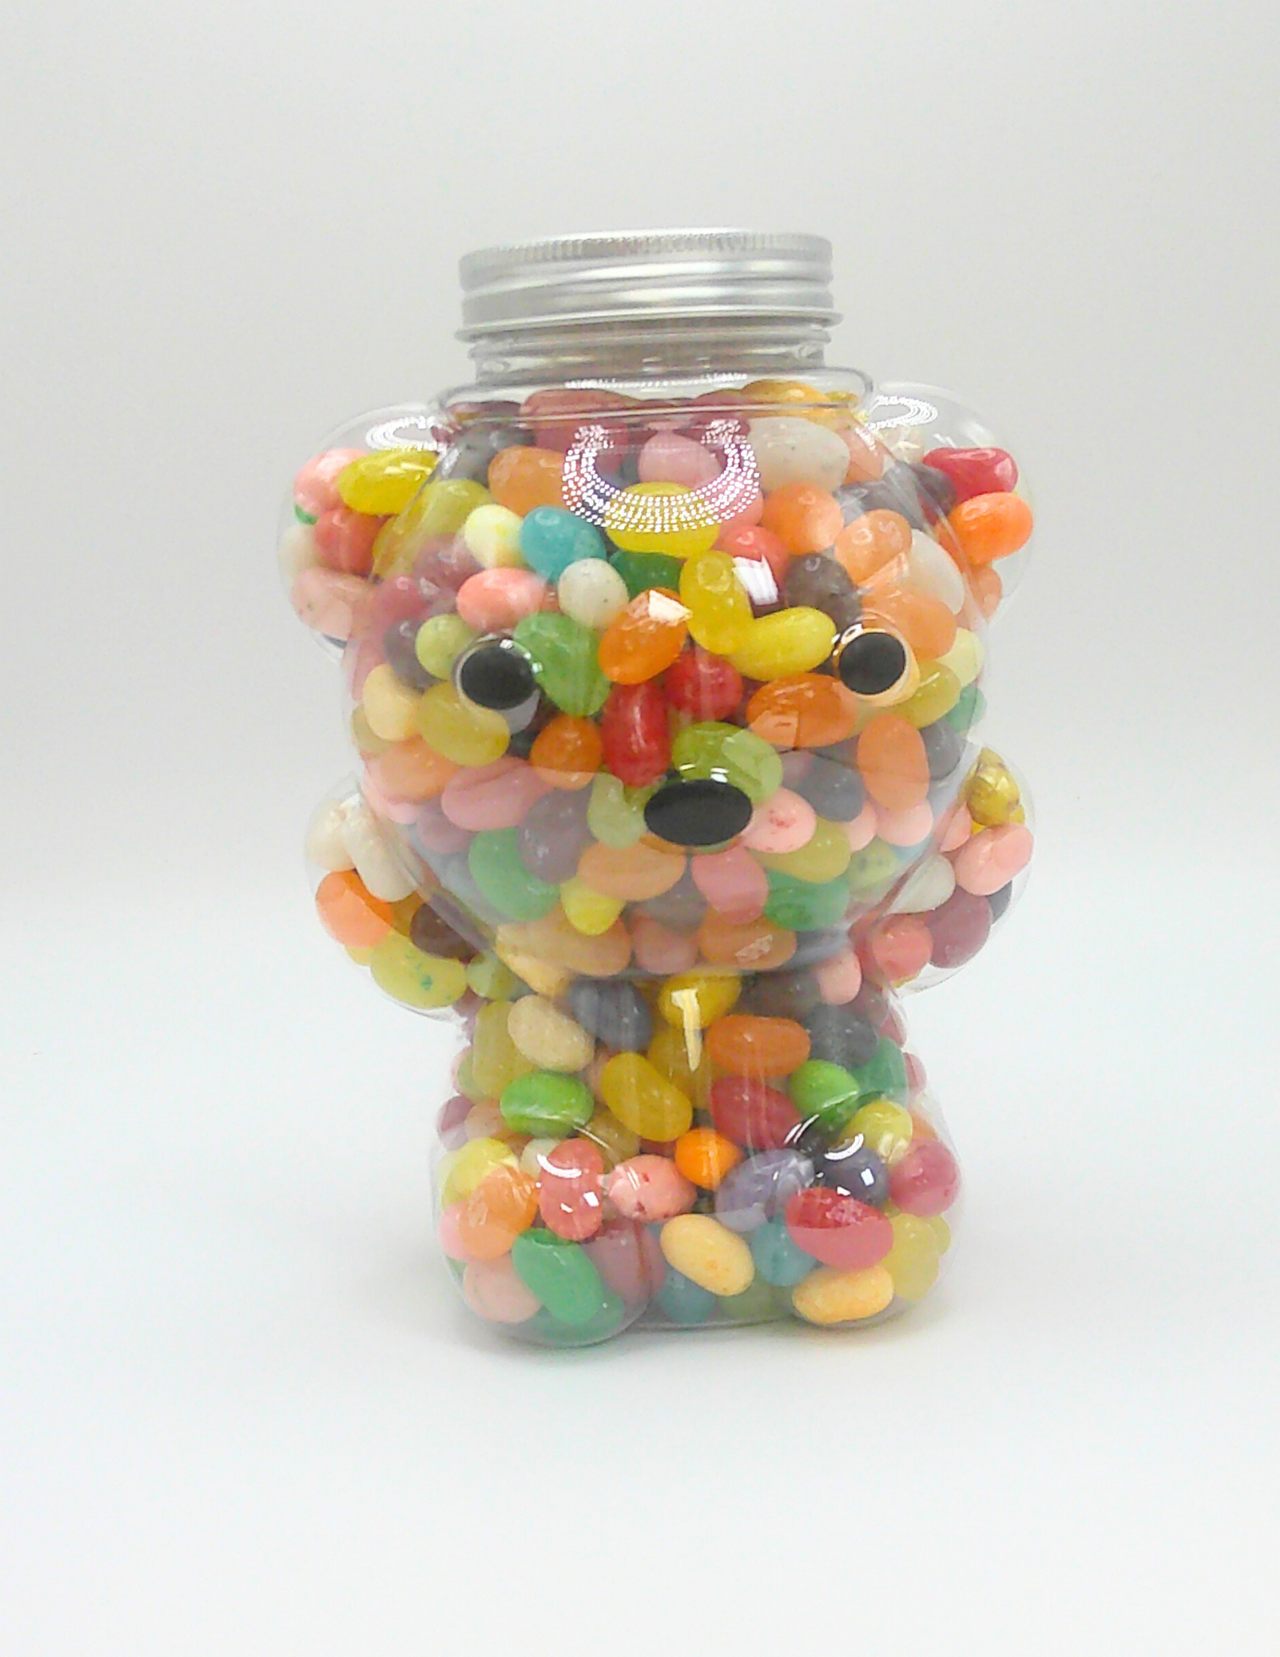 Jar of Assorted Jelly Beans